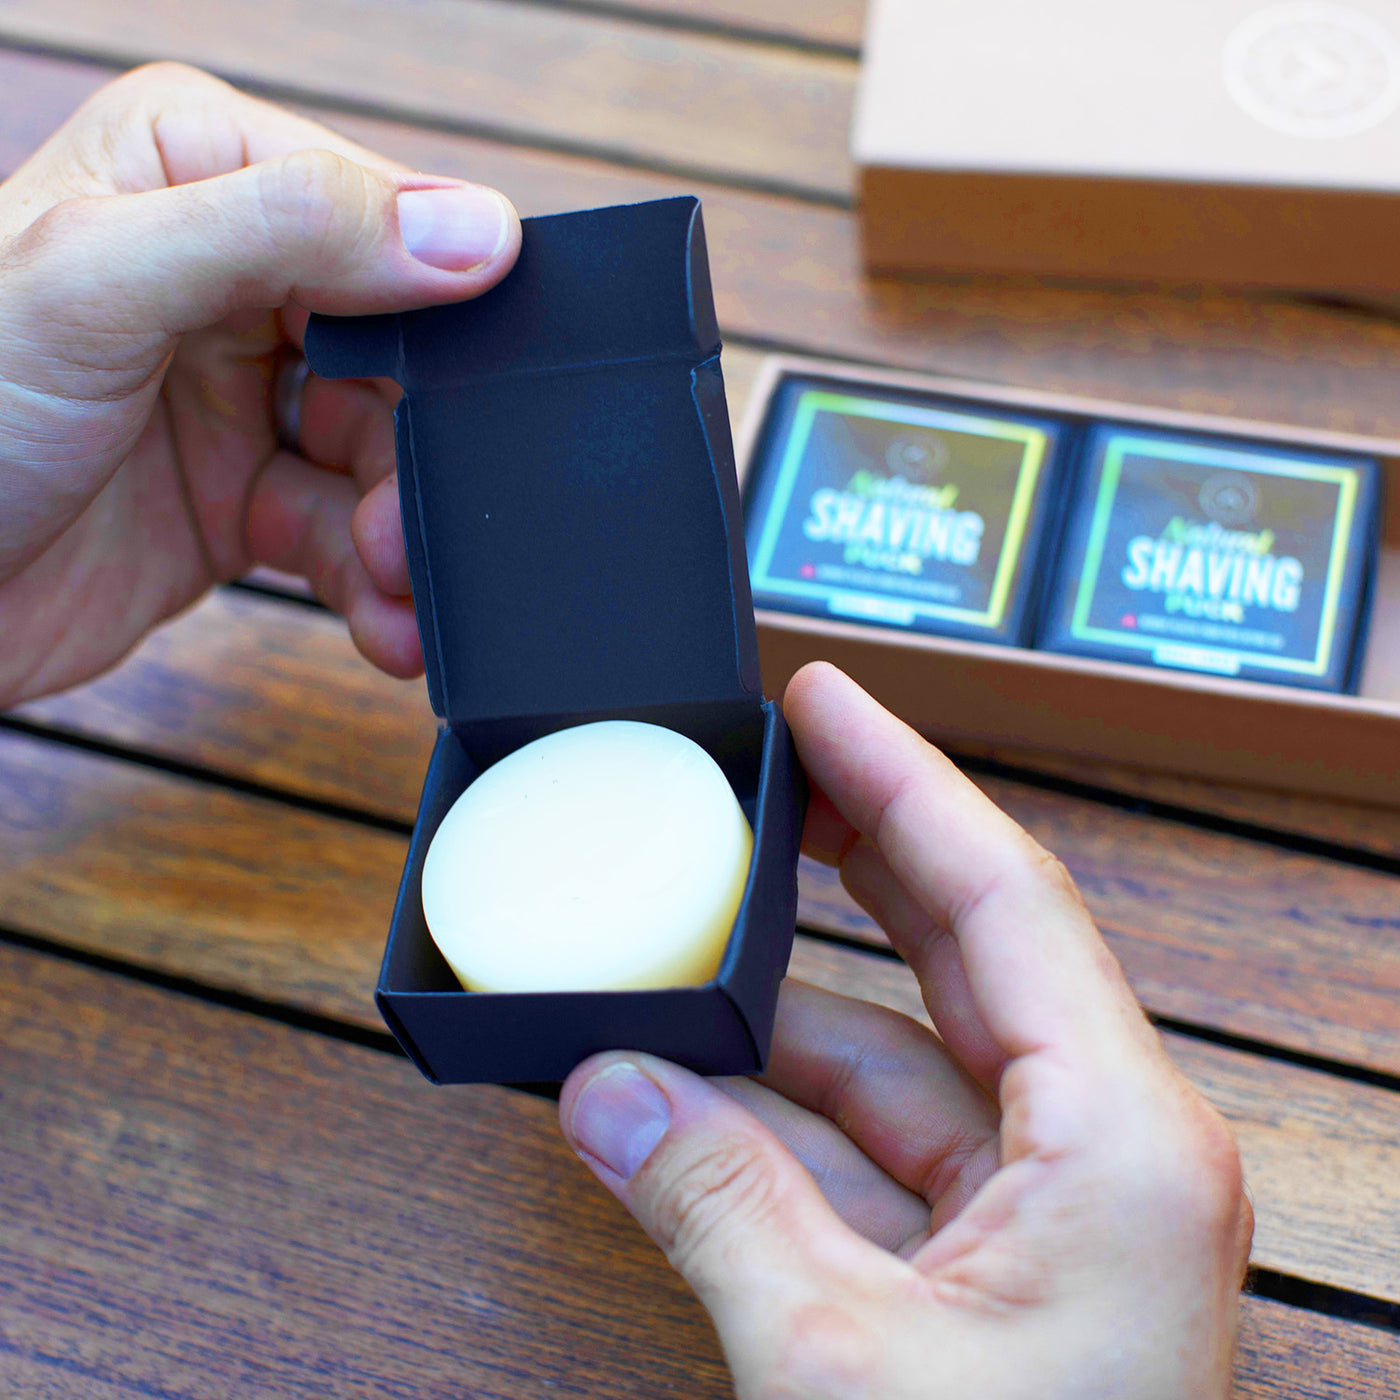  Noah's Organic Shave Puck | 3 Pucks by Naked Armor sold by Naked Armor Razors